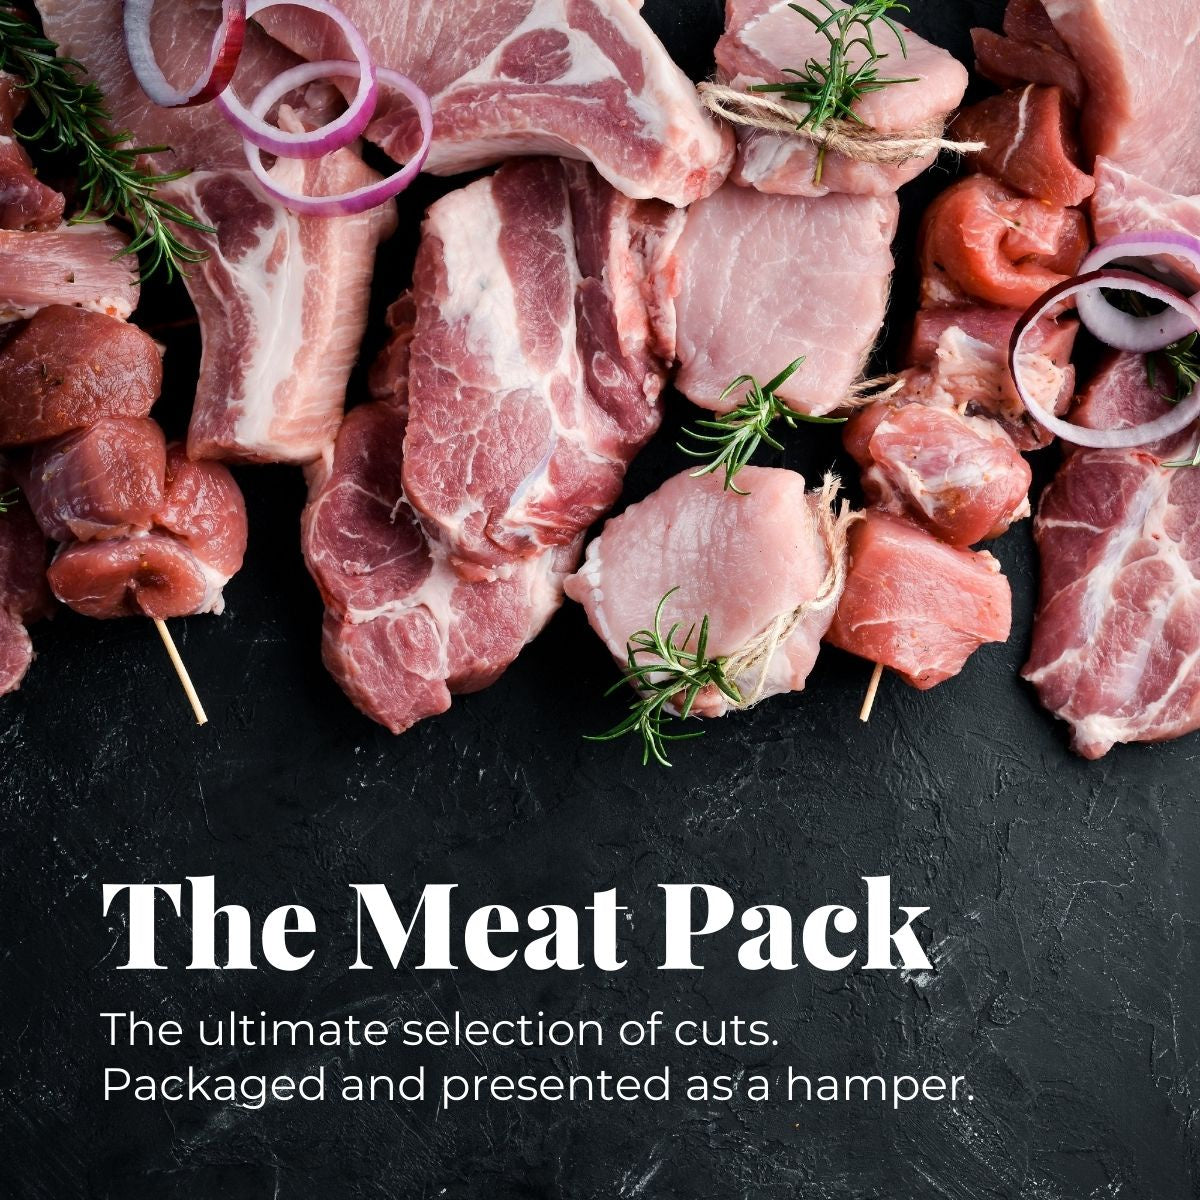 The Meat Pack